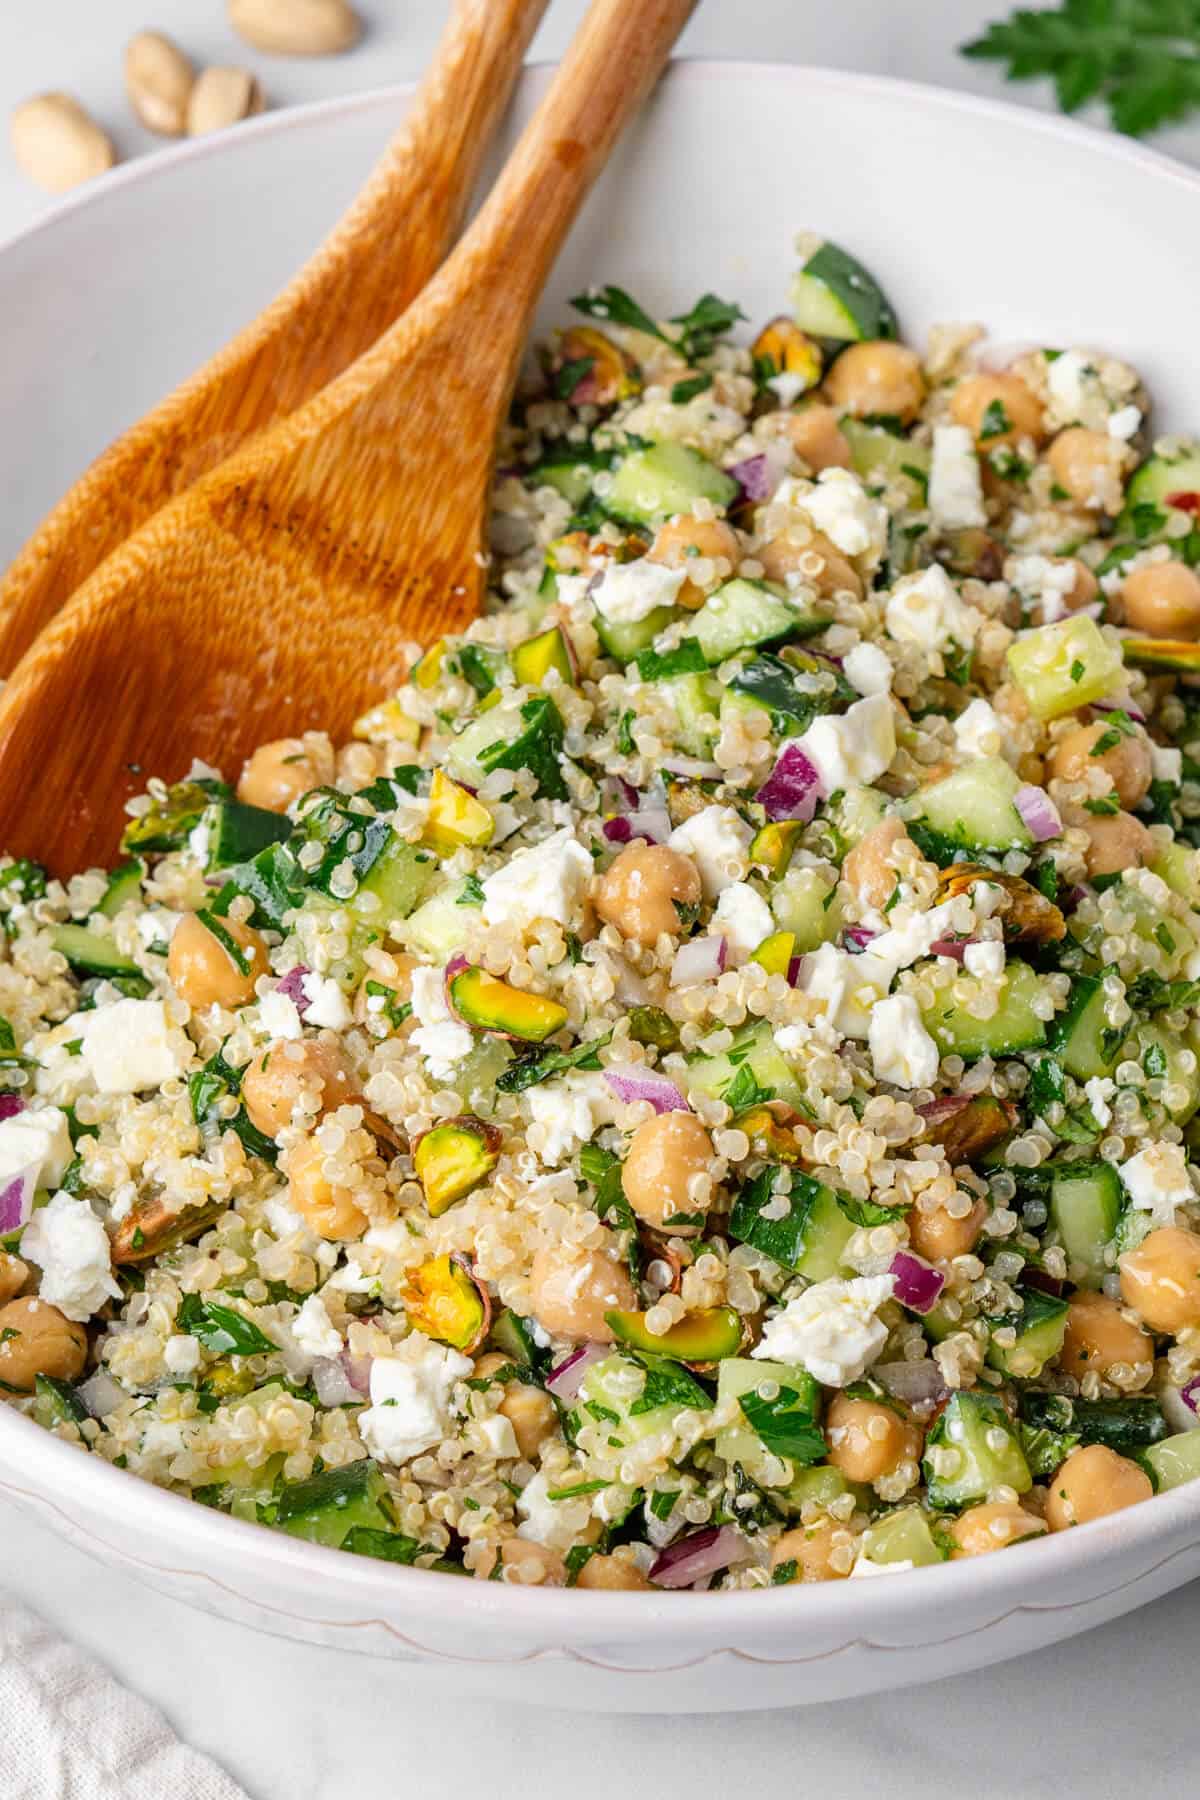 Jennifer Aniston Salad with quinoa in a bowl